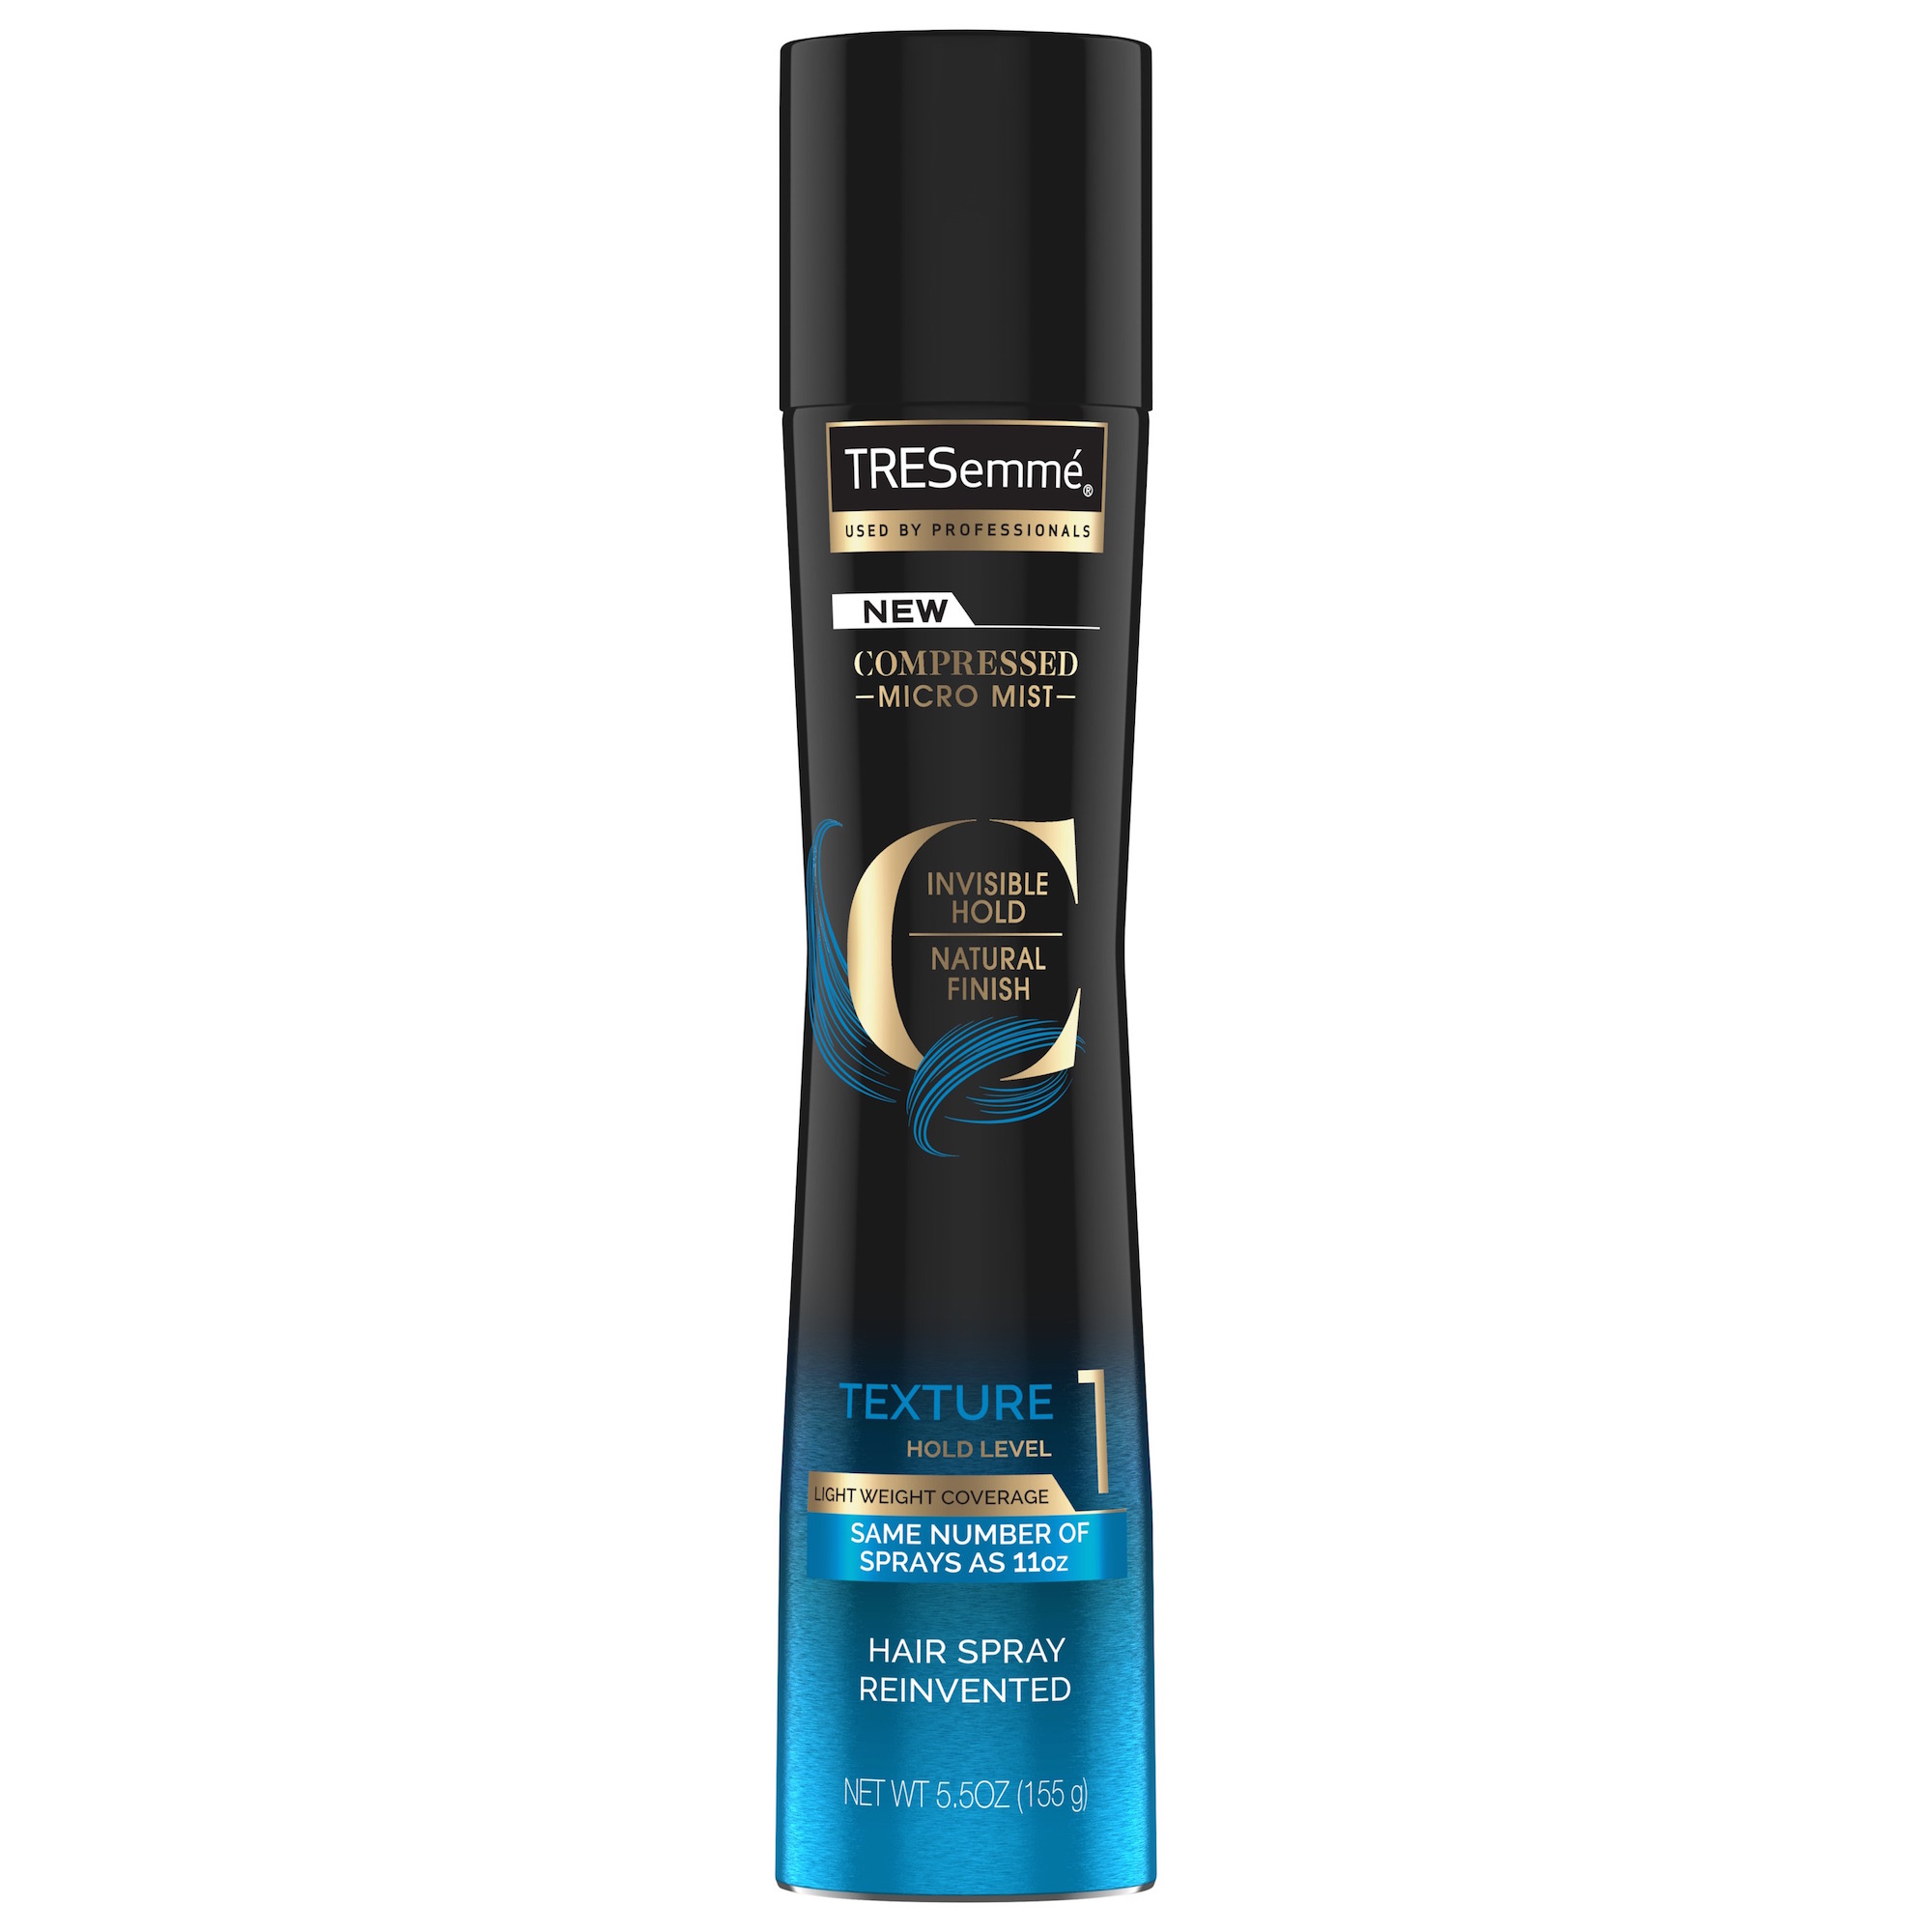 Tresemme Compressed Micro Mist Flexible Hold Hairspray Texture Hold Level 1 5.5 oz - image 1 of 5